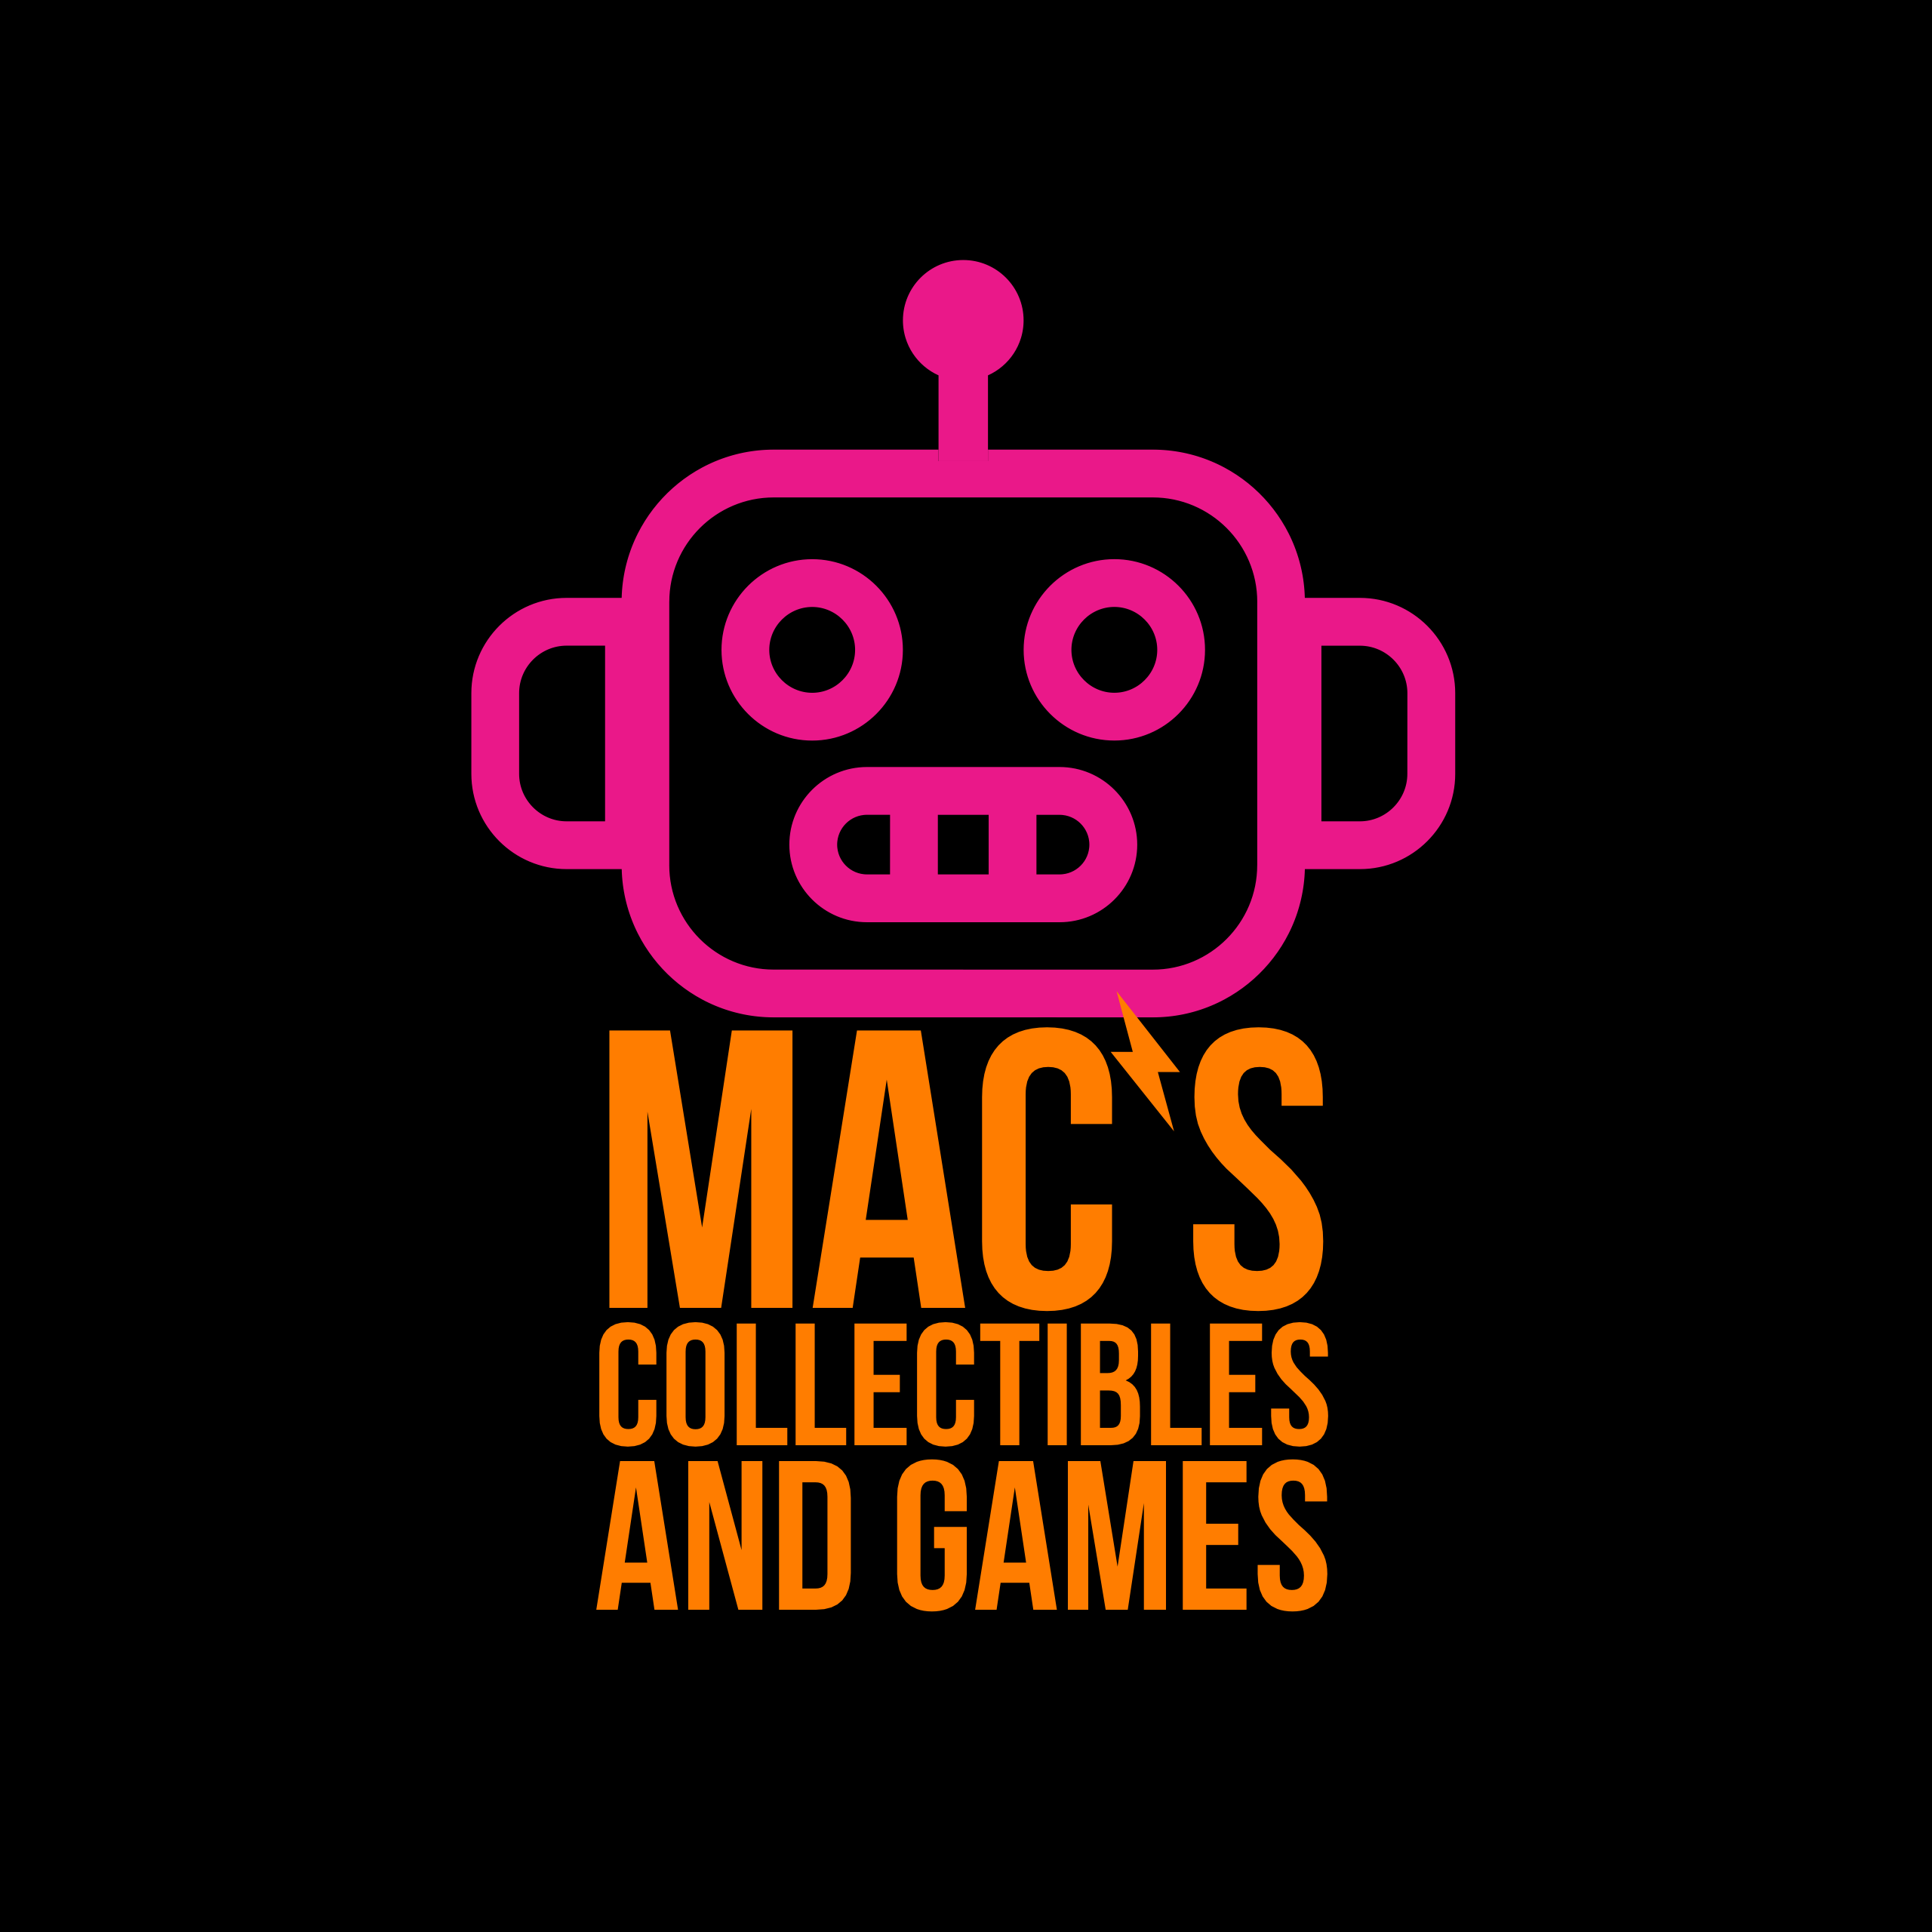 Mac's Collectibles and Games